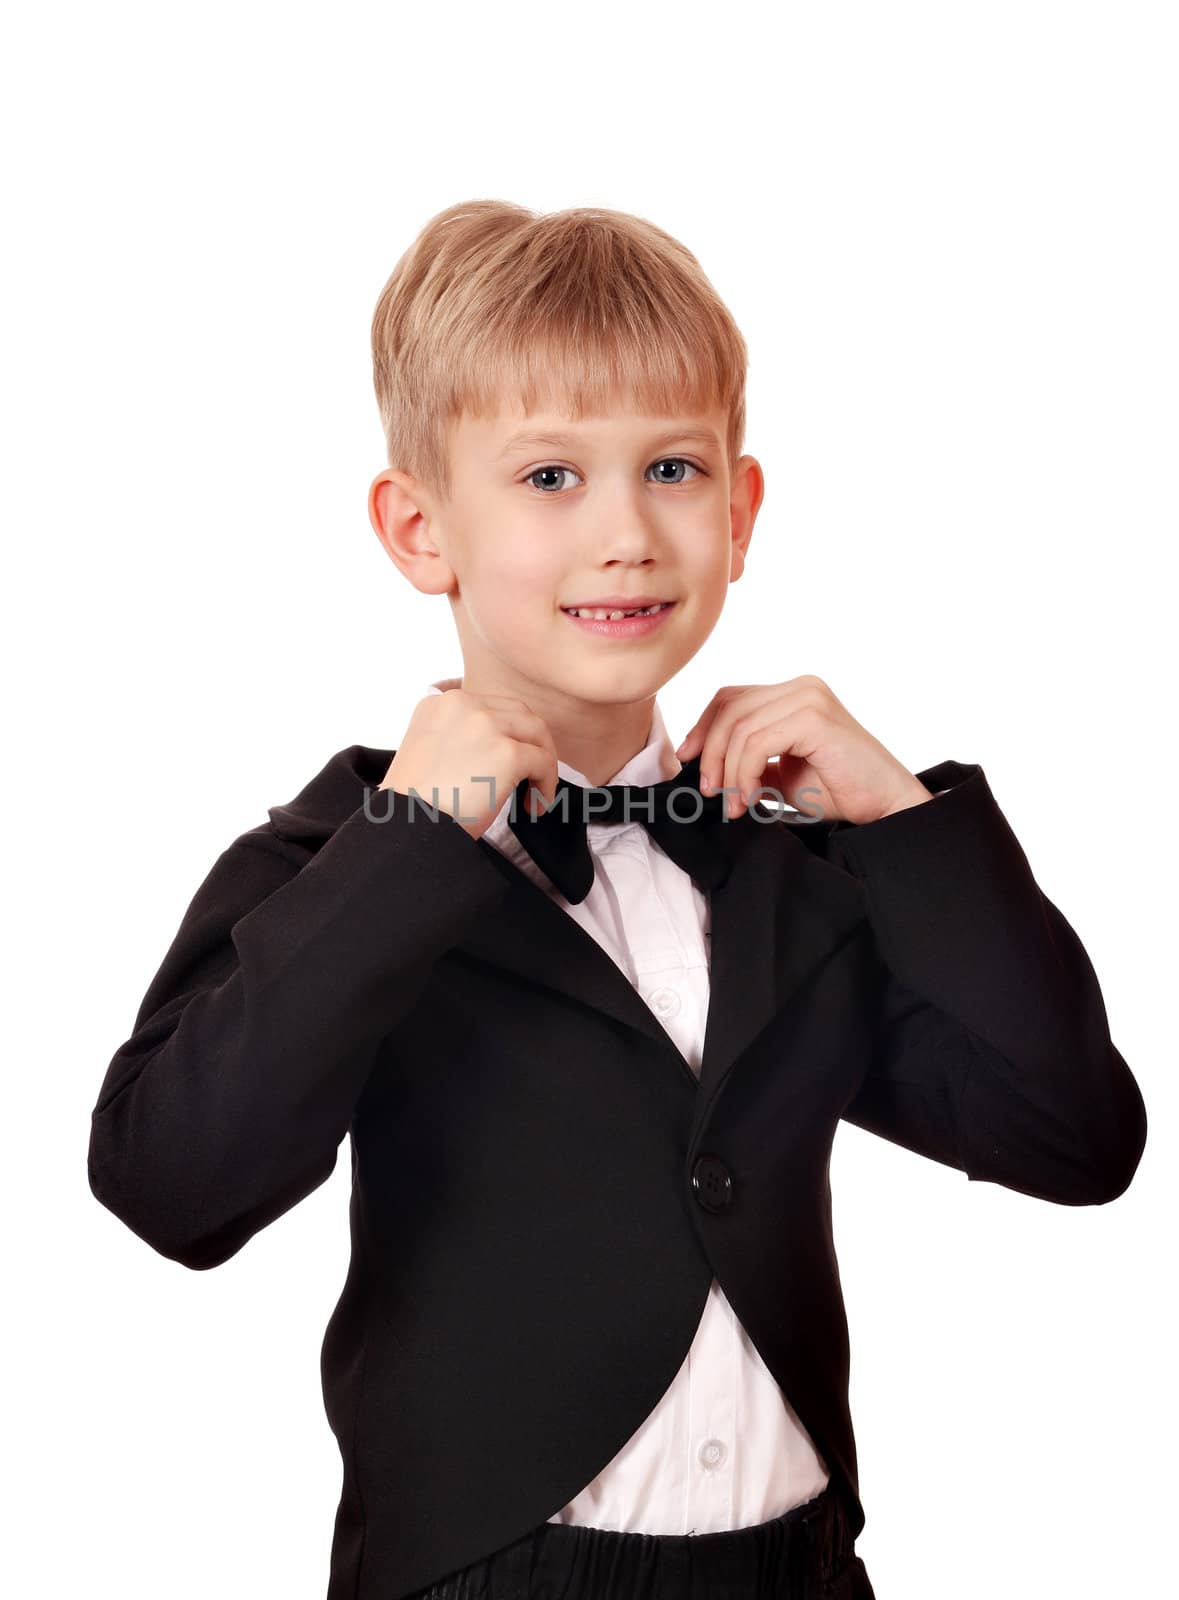 boy with bow tie and black tuxedo suit by goce